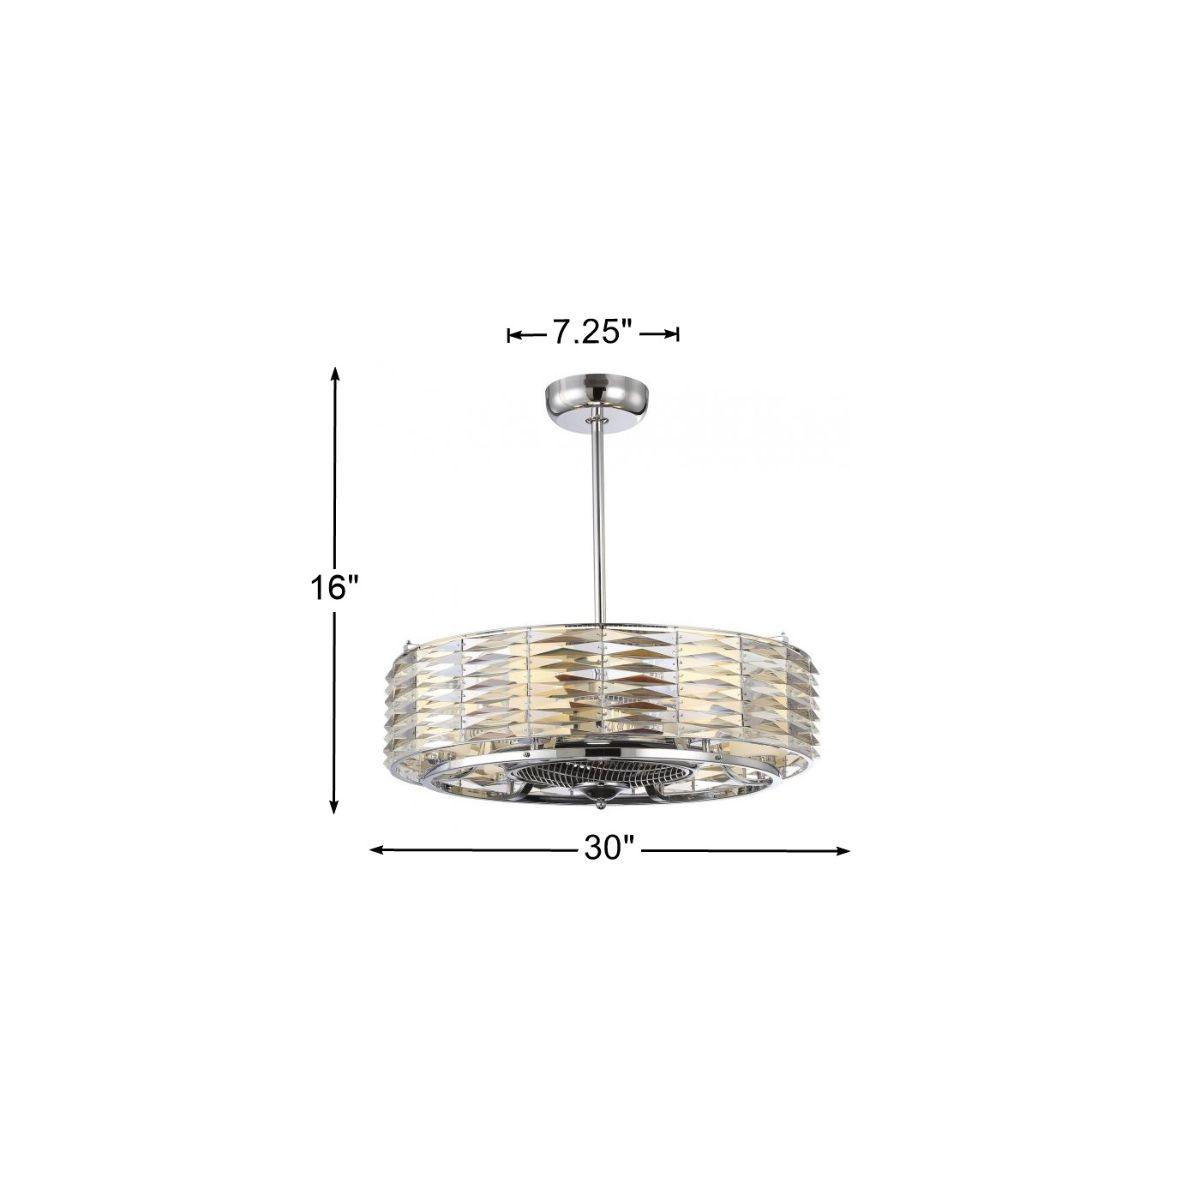 Taurus 30 Inch Chandelier Ceiling Fan With Light And Remote, Polished Chrome Finish